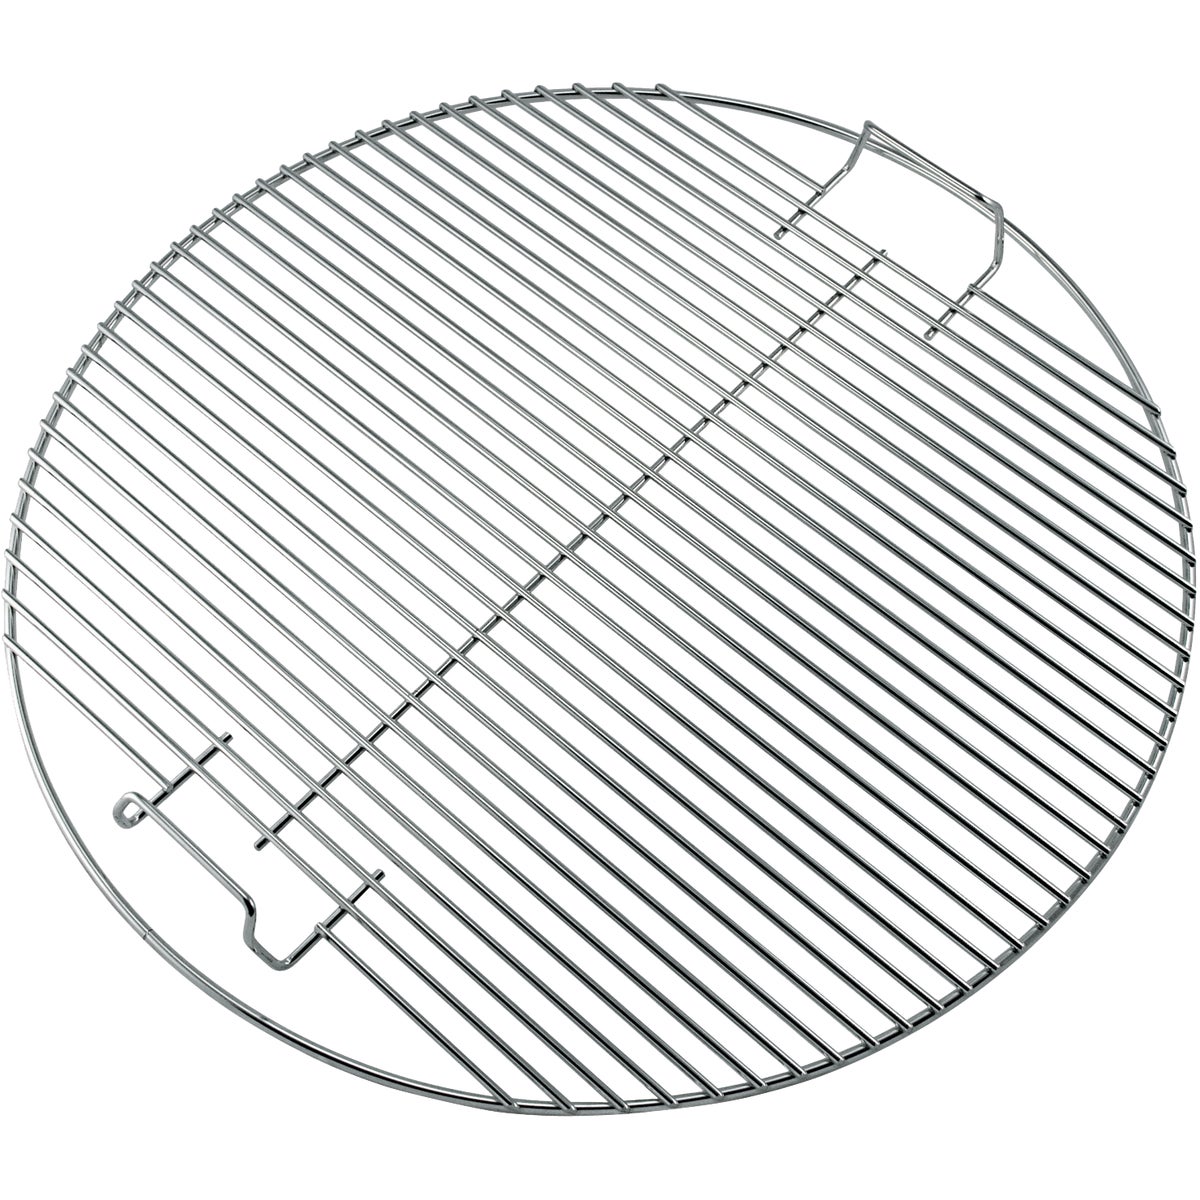 Item 812865, Heavy steel cooking grate for kettle grills. For use with 22-1/2 In.